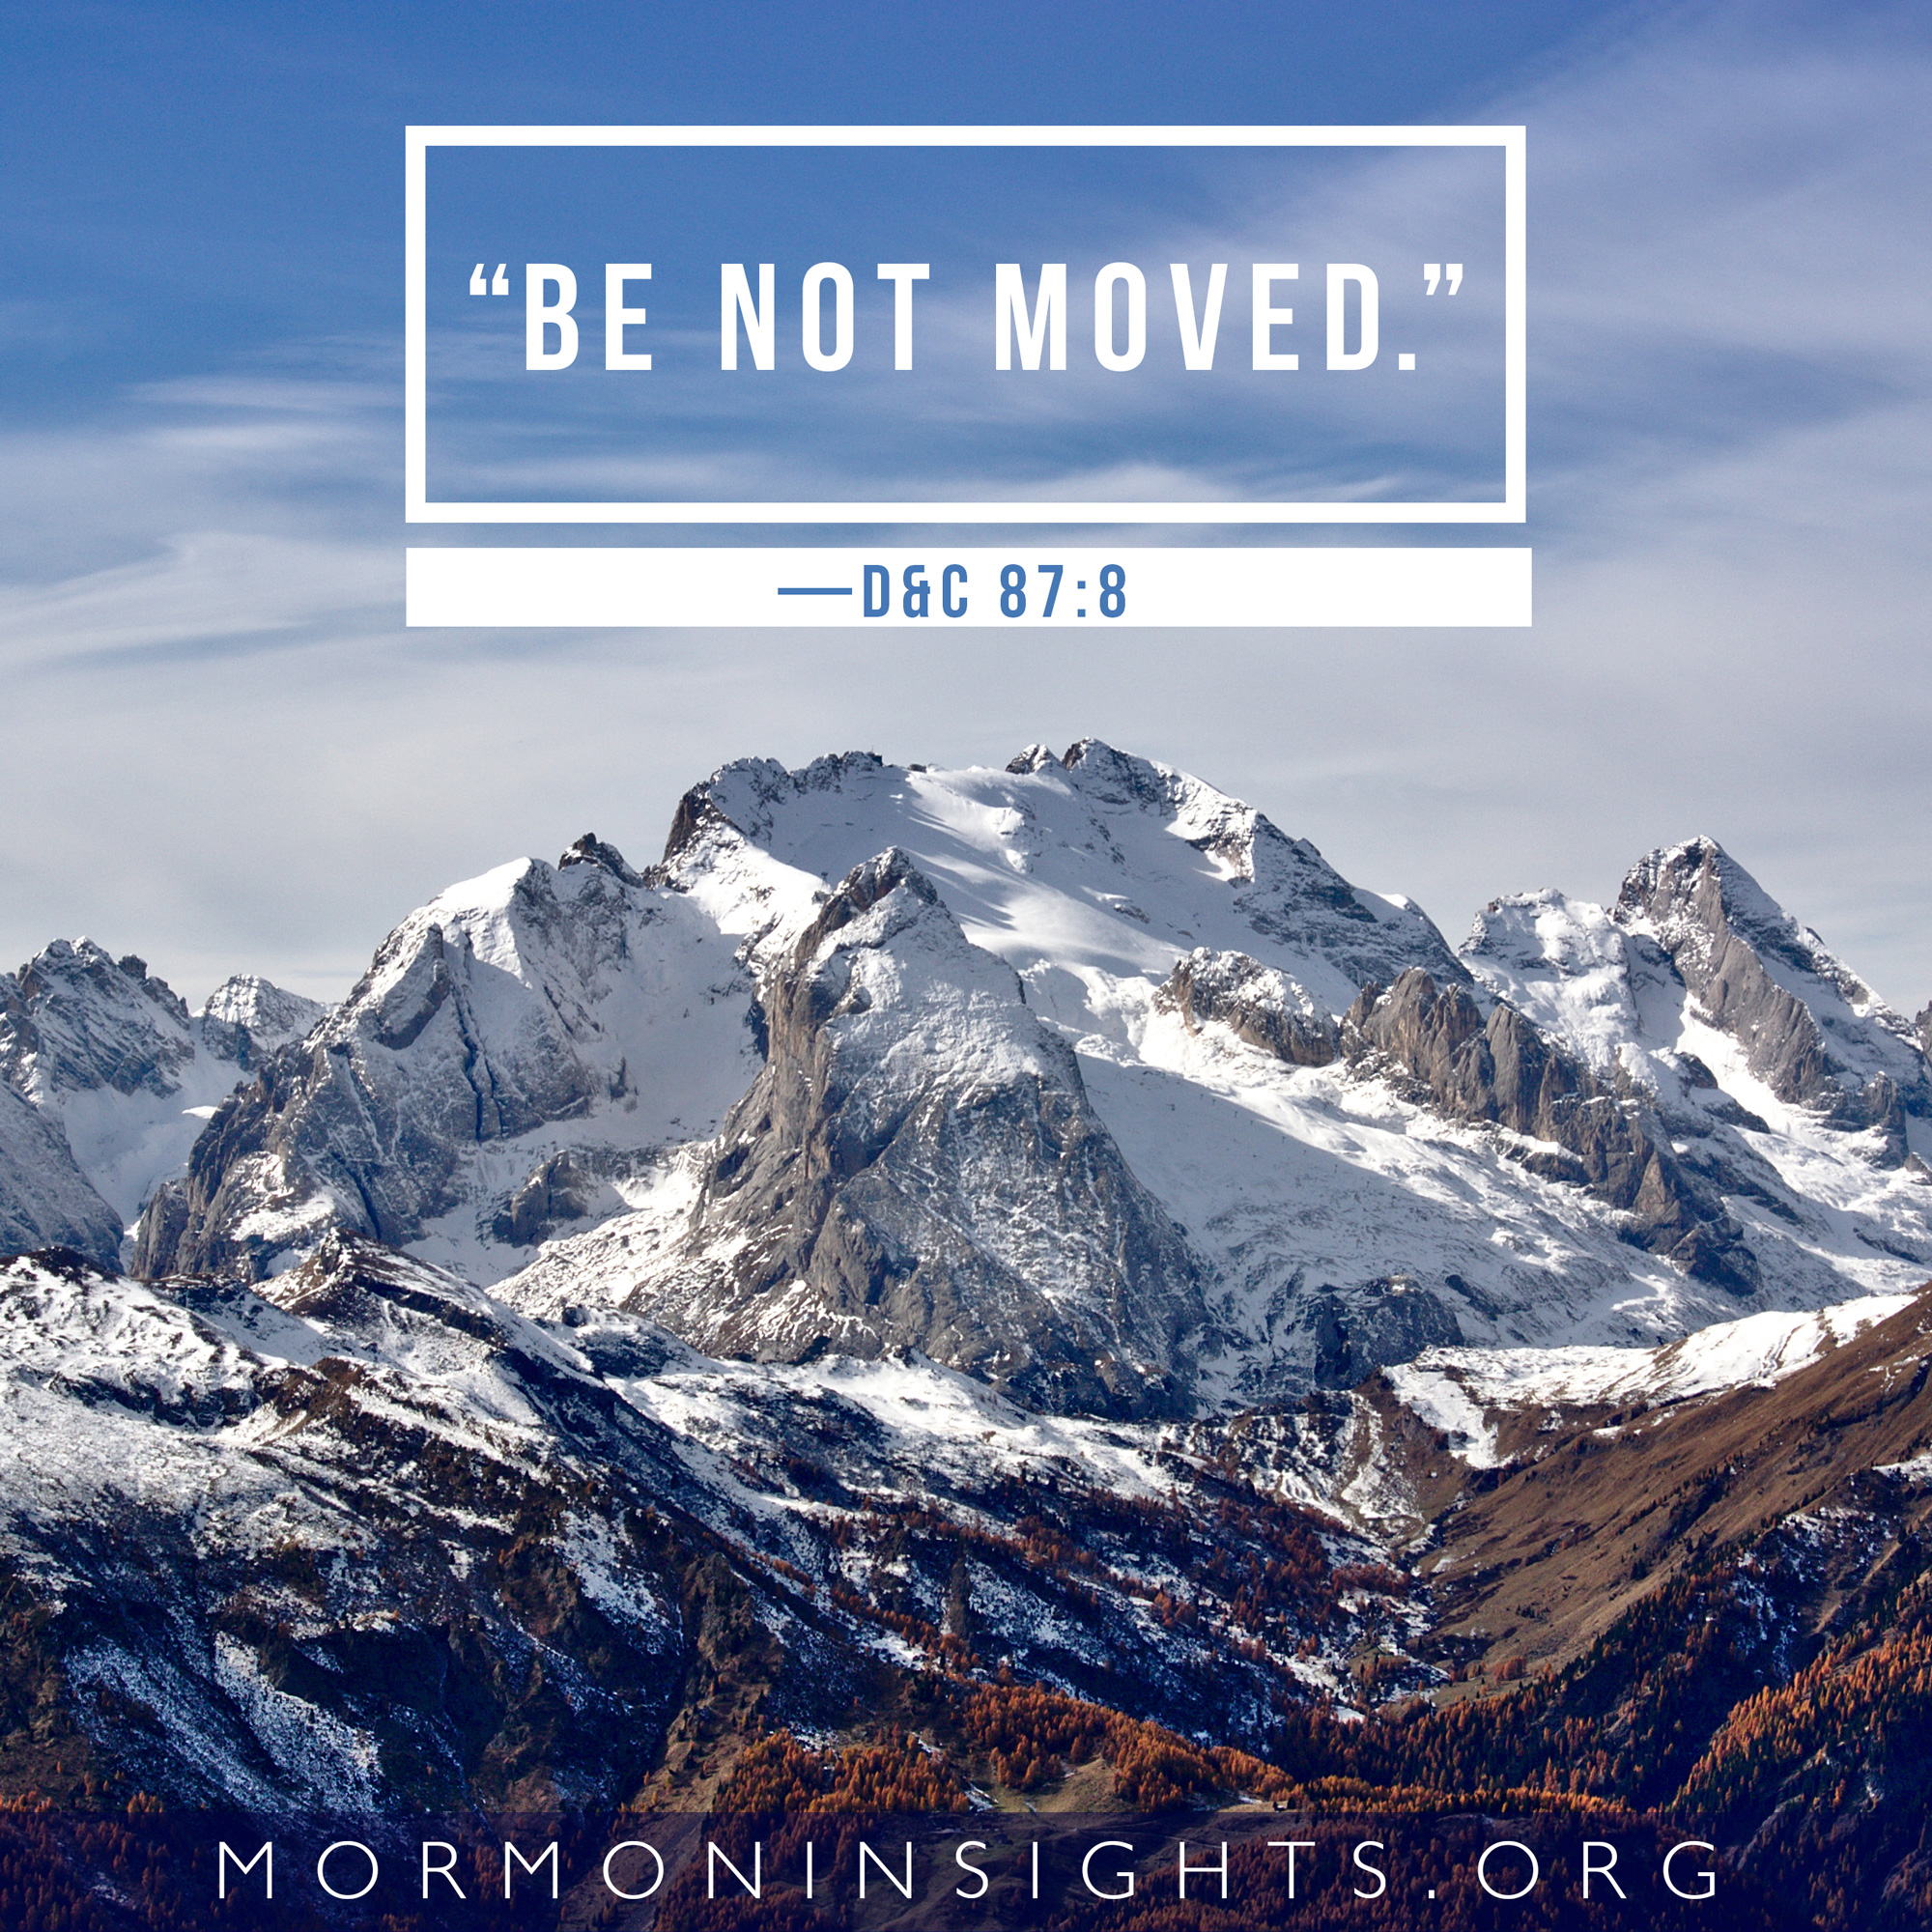 Picture quote: mountain with text "Be not moved"